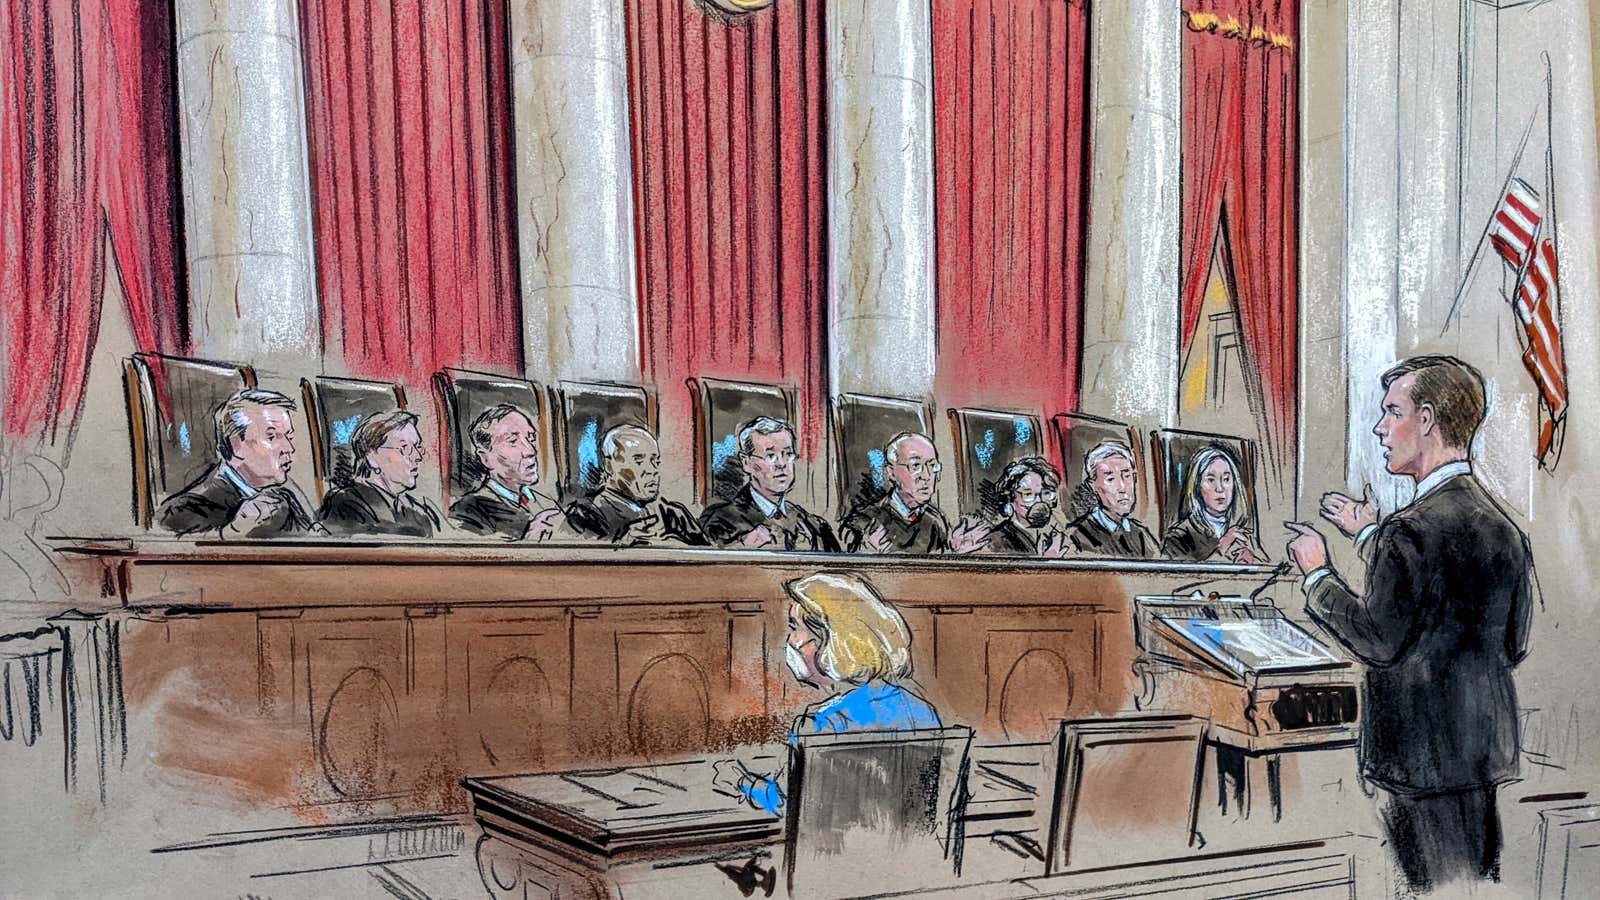 The nine justices